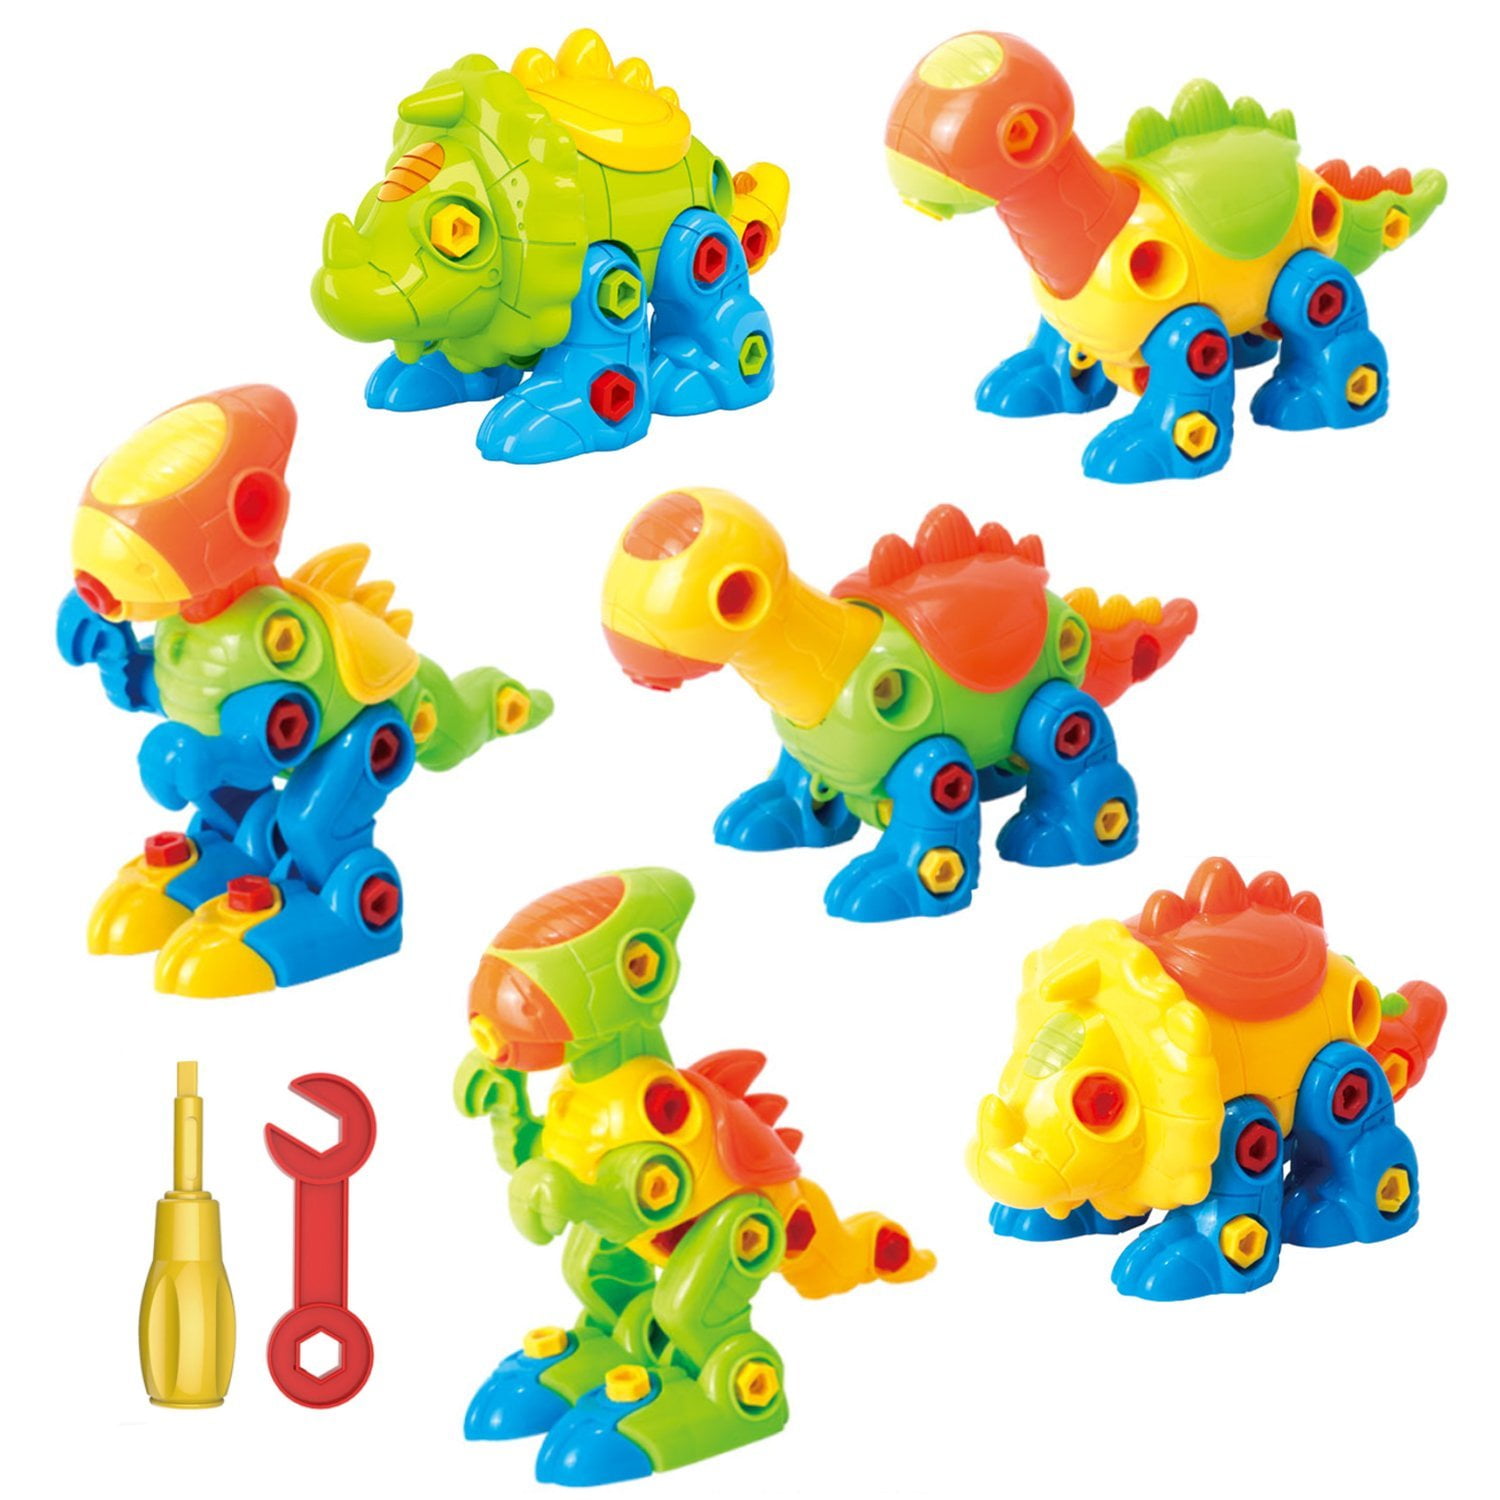 Photo 1 of Dinosaurs Take Apart Toys With Tools, Set of 6 Dinosaurs Age 3 12 years old 218 pieces